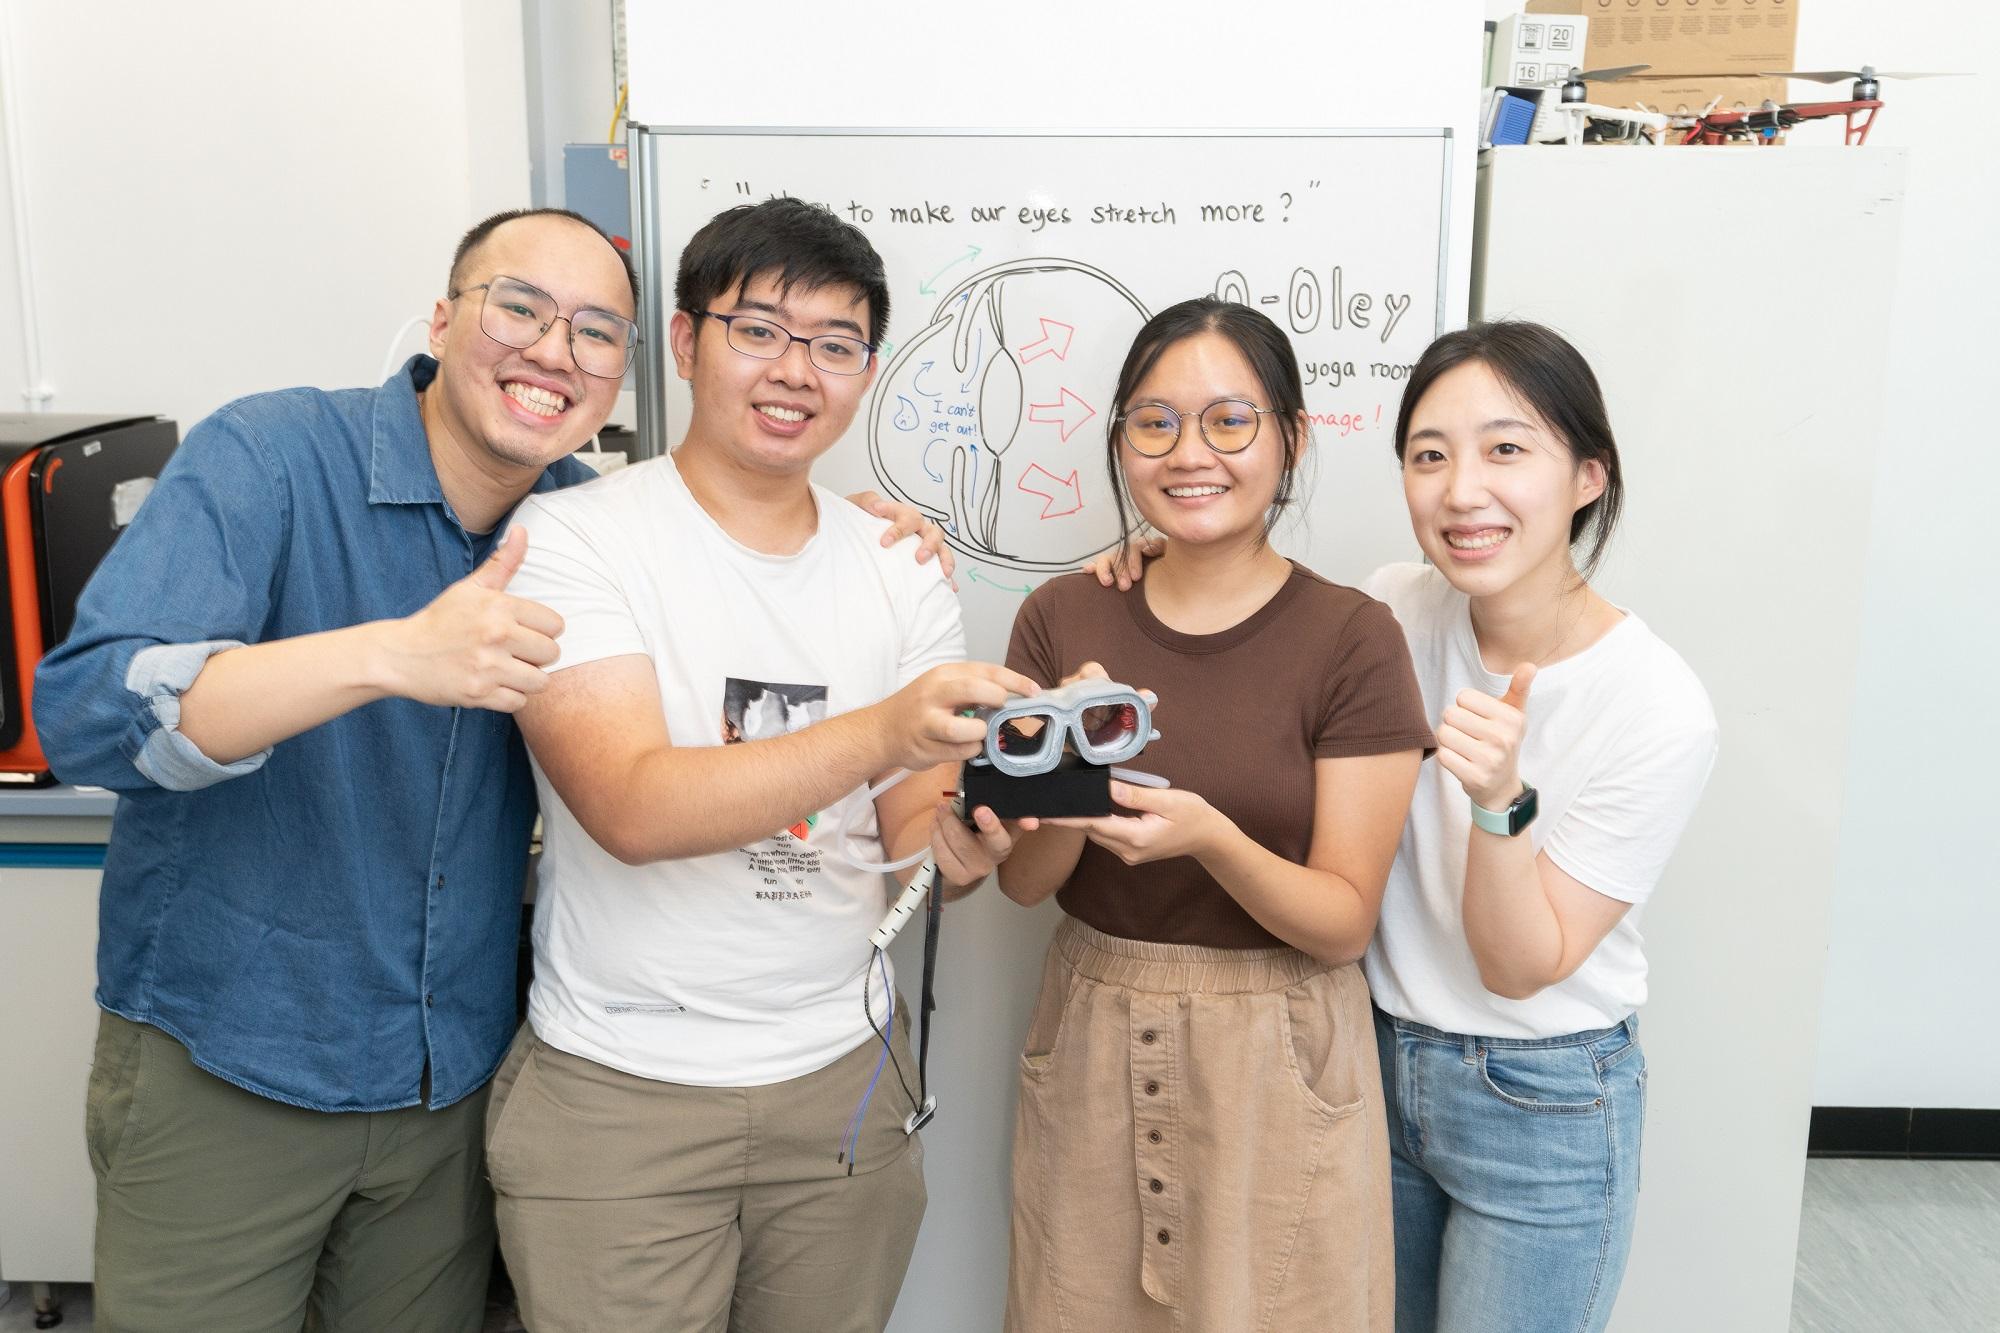 (From left) Kwok Kin-Nam, Chan Kwun-Chung, Minji Seo, and Leung Yuen-Yin awarded 2022 James Dyson Award National Winners with their invention O_Oley.